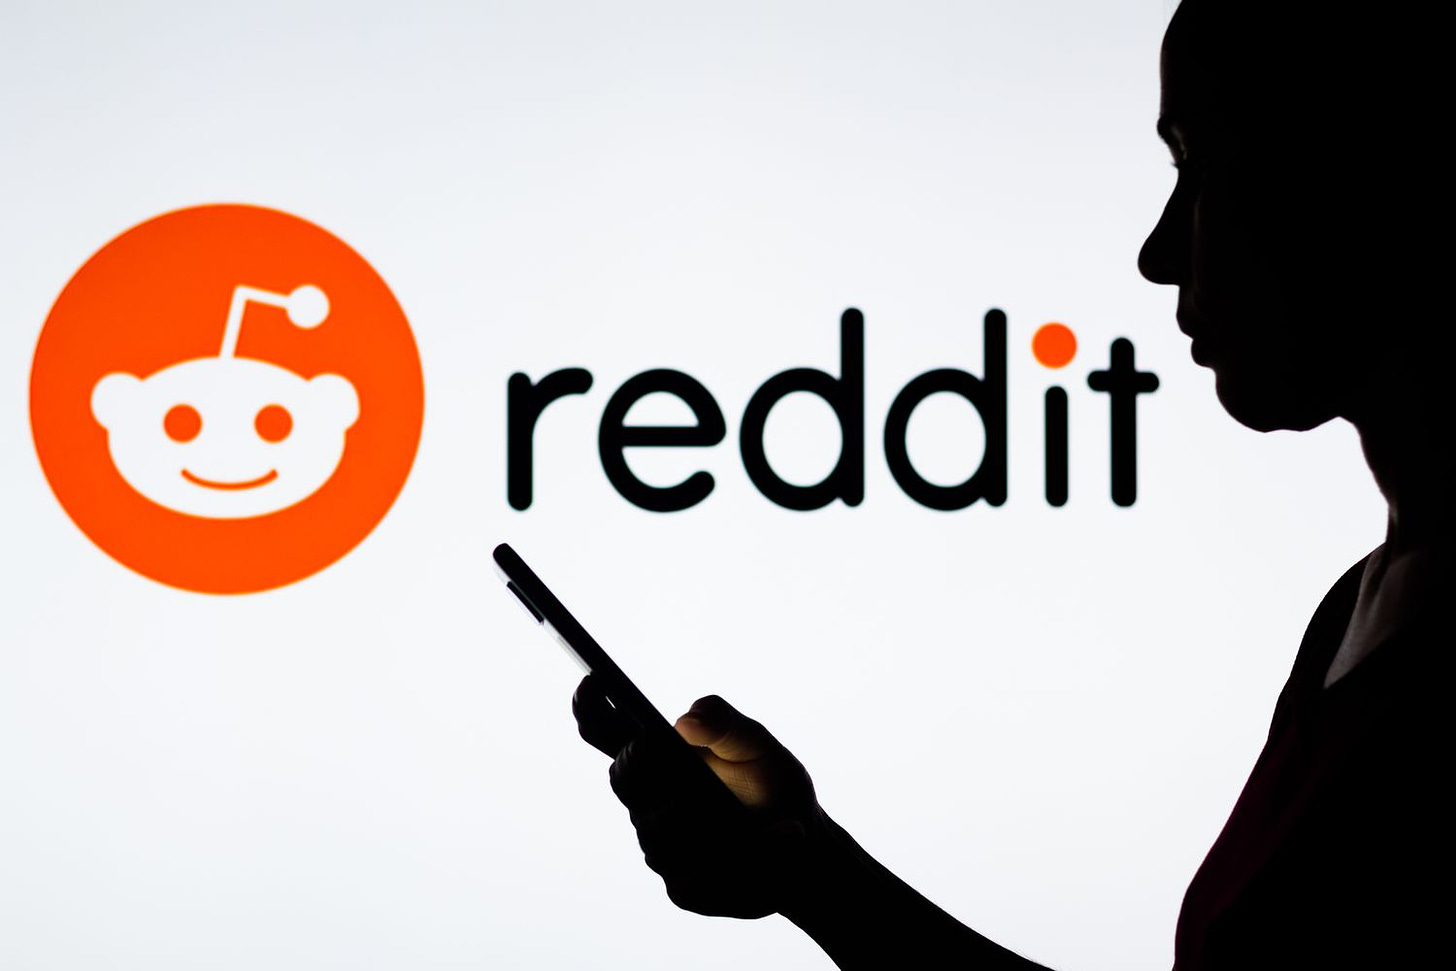 Reddit Plans To Raise Up To $748 Million in IPO